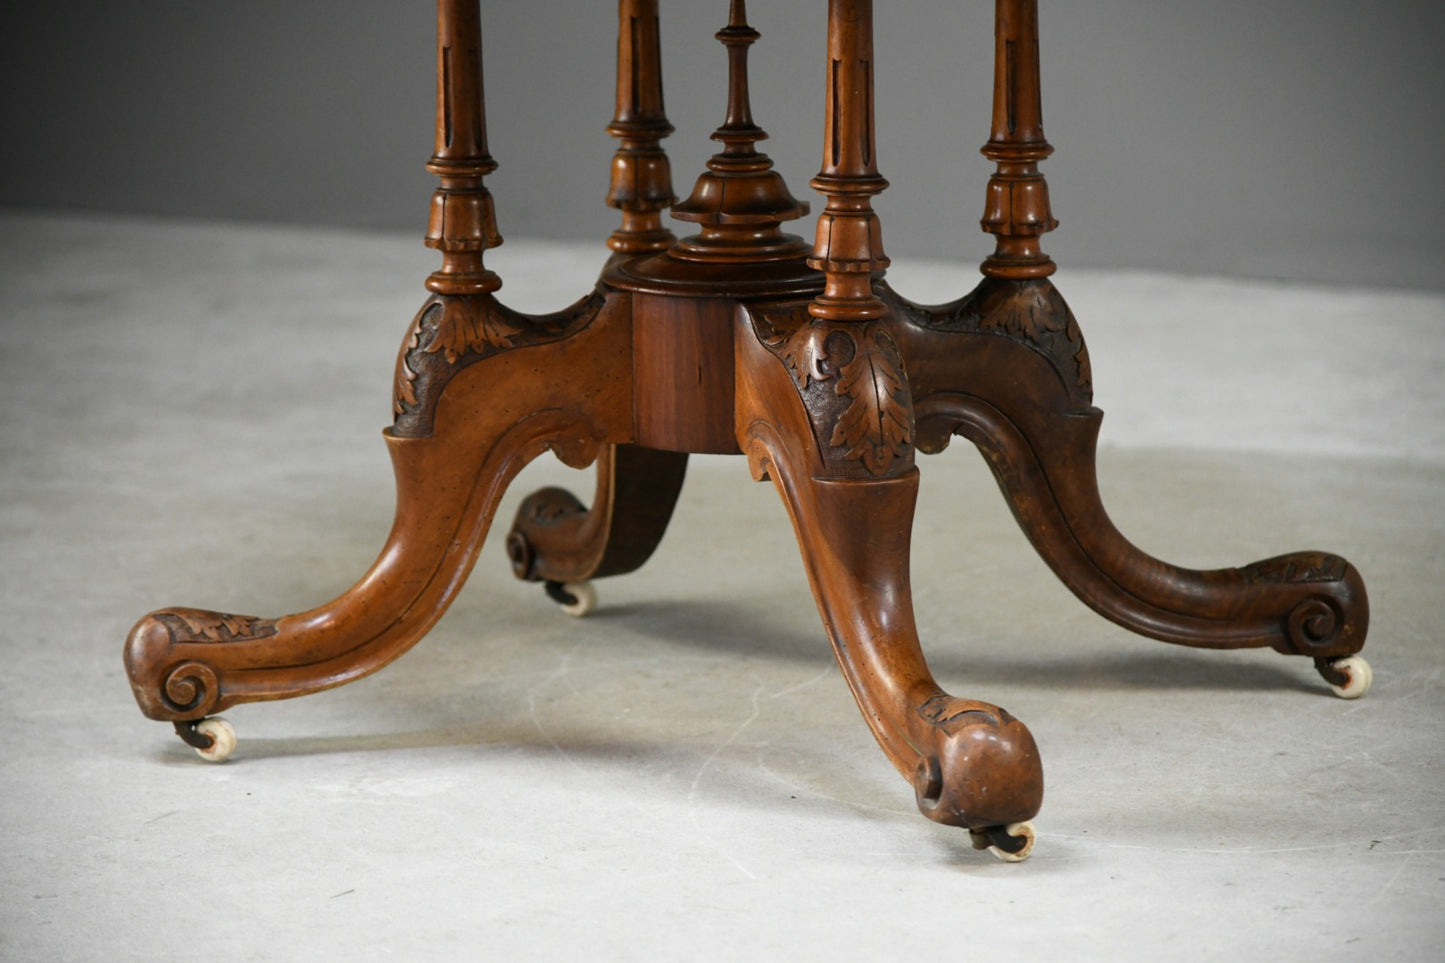 Antique Walnut Snap Top Table